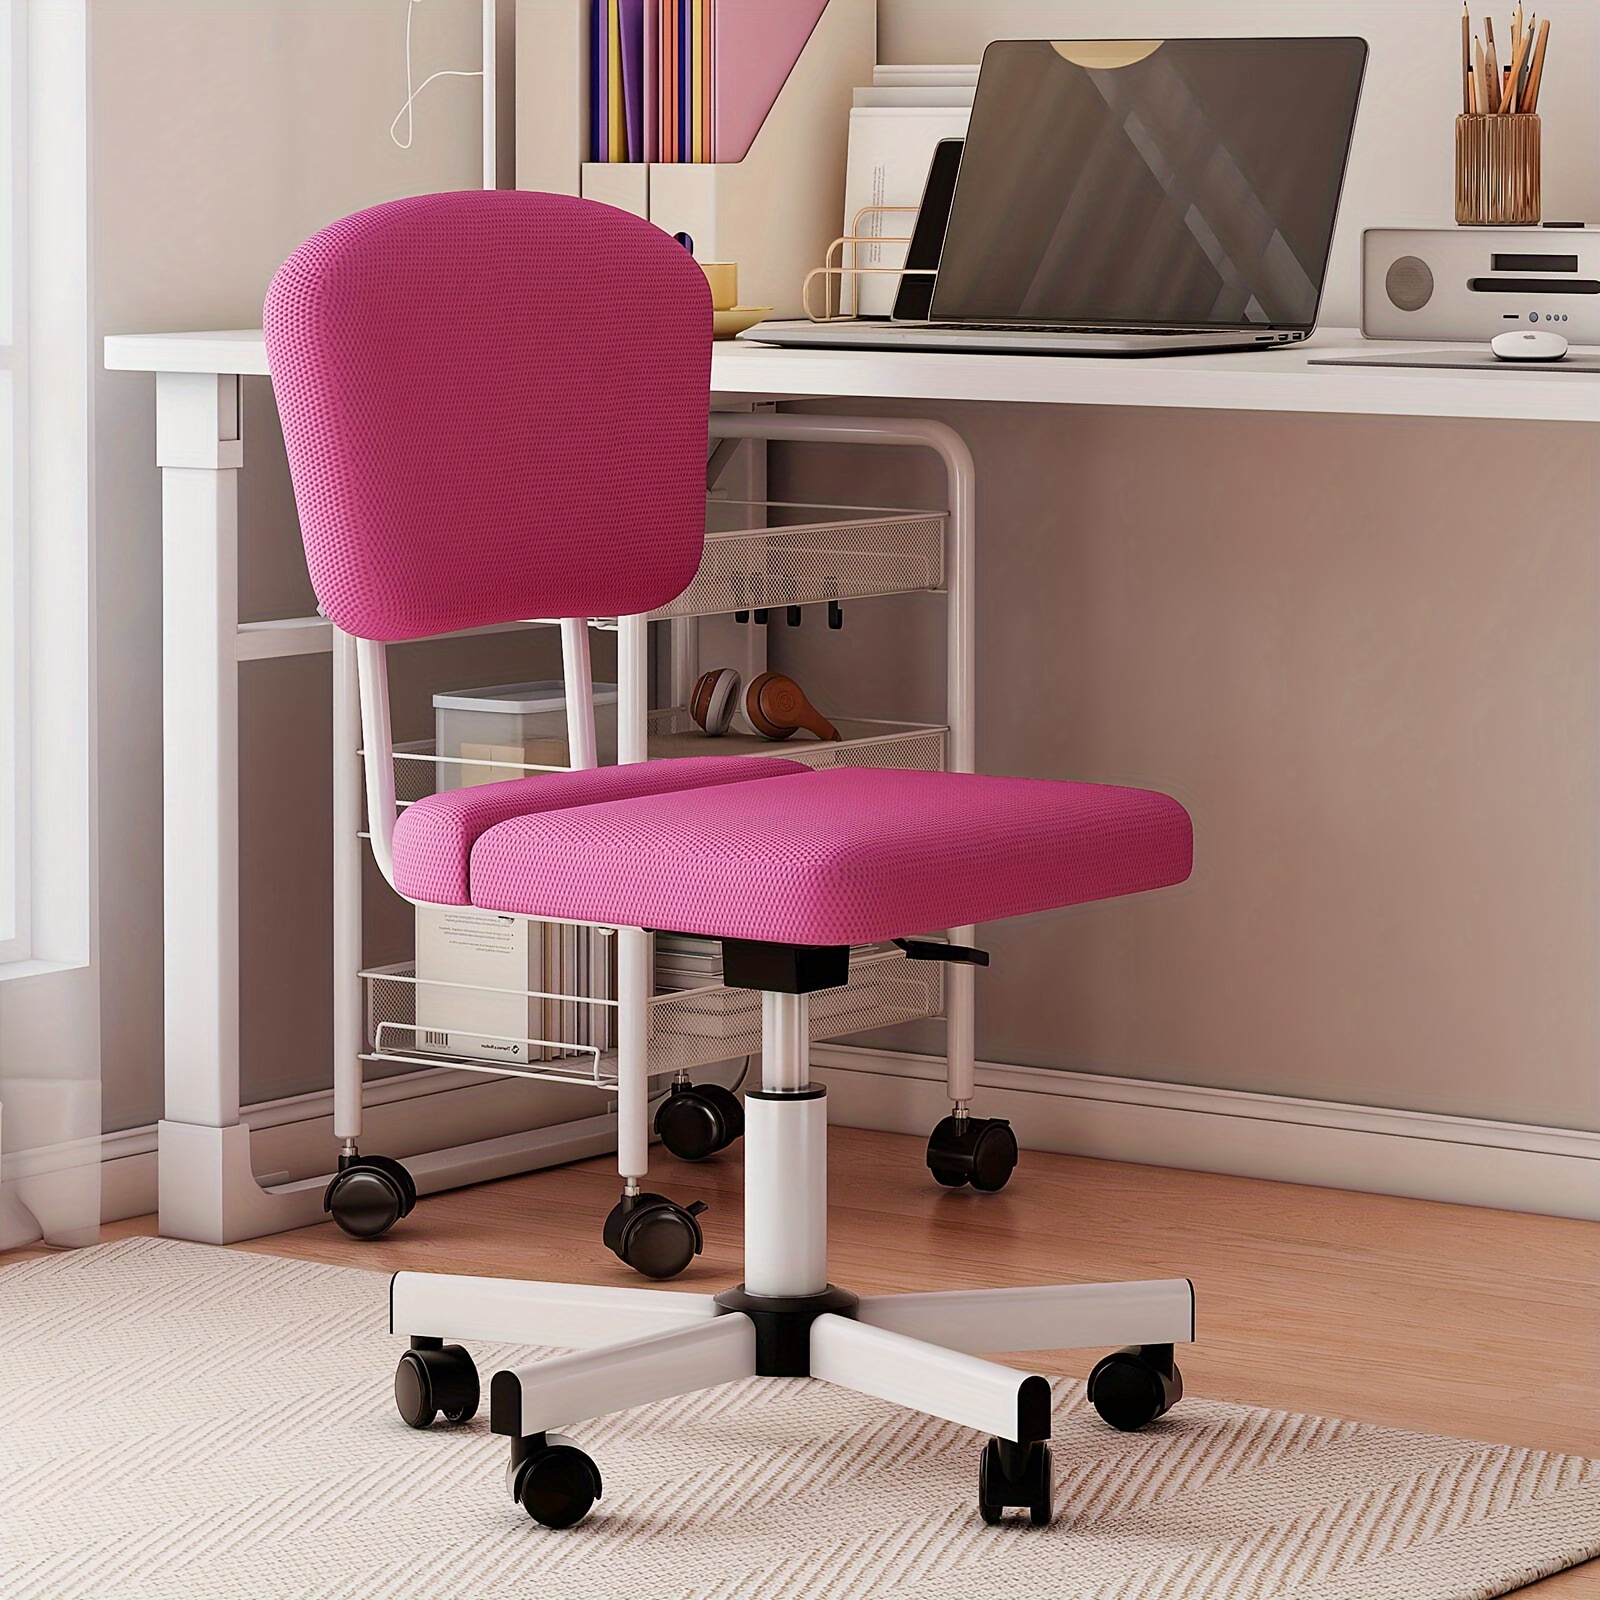 

1pc Home Office Desk Chair, Adjustable Rotating Rolling Task Chair, Comfortable Computer Chair, Desk Chair For Home Office Pink